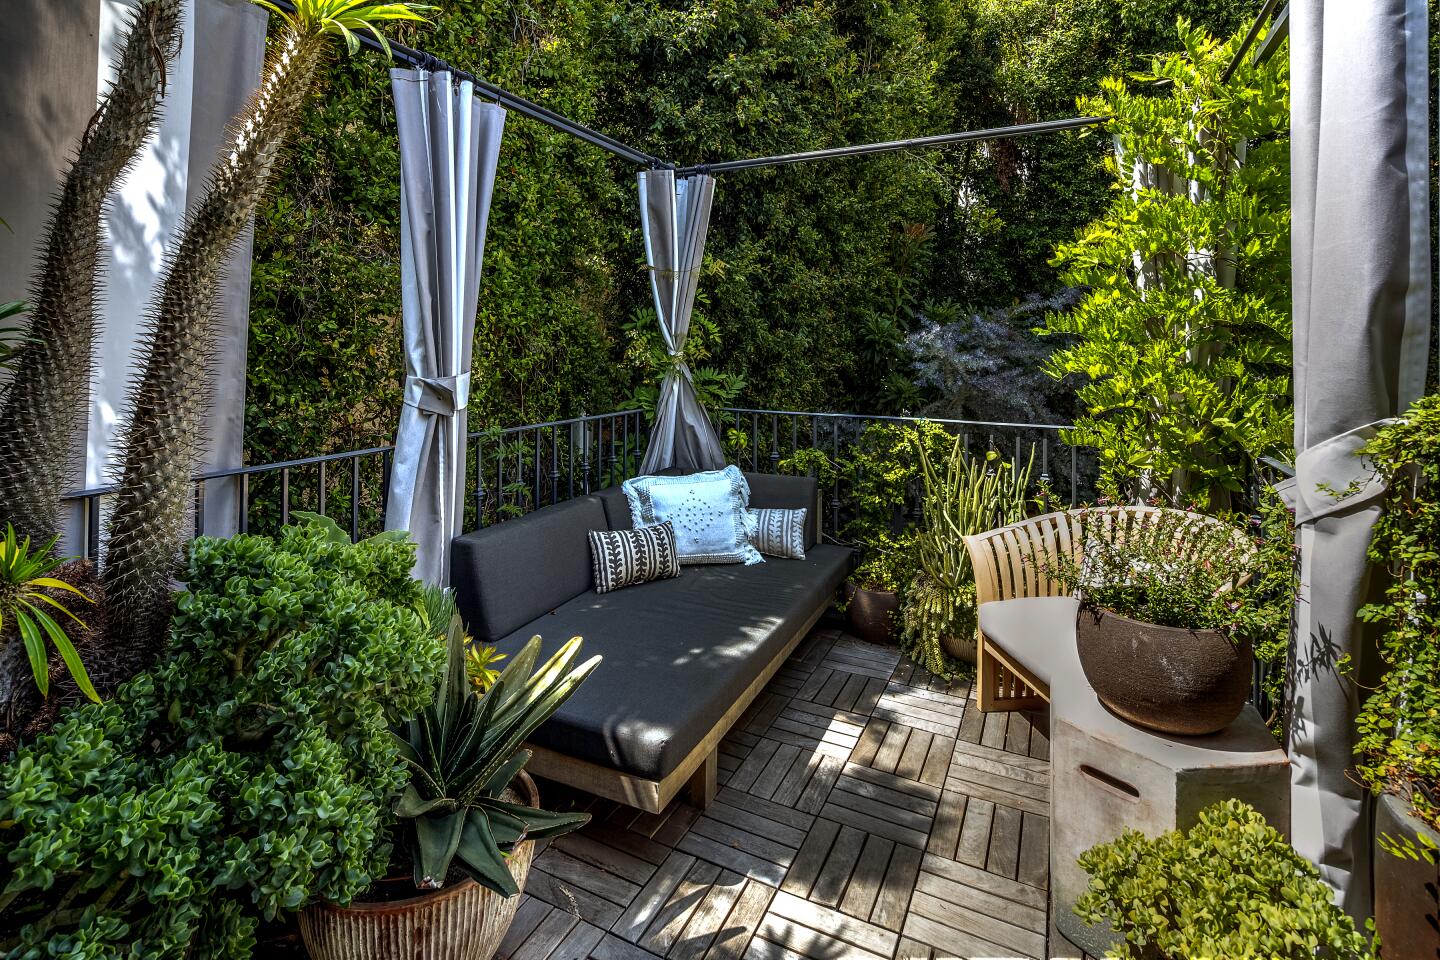 The home's backyard was designed as a series of small outdoor rooms.